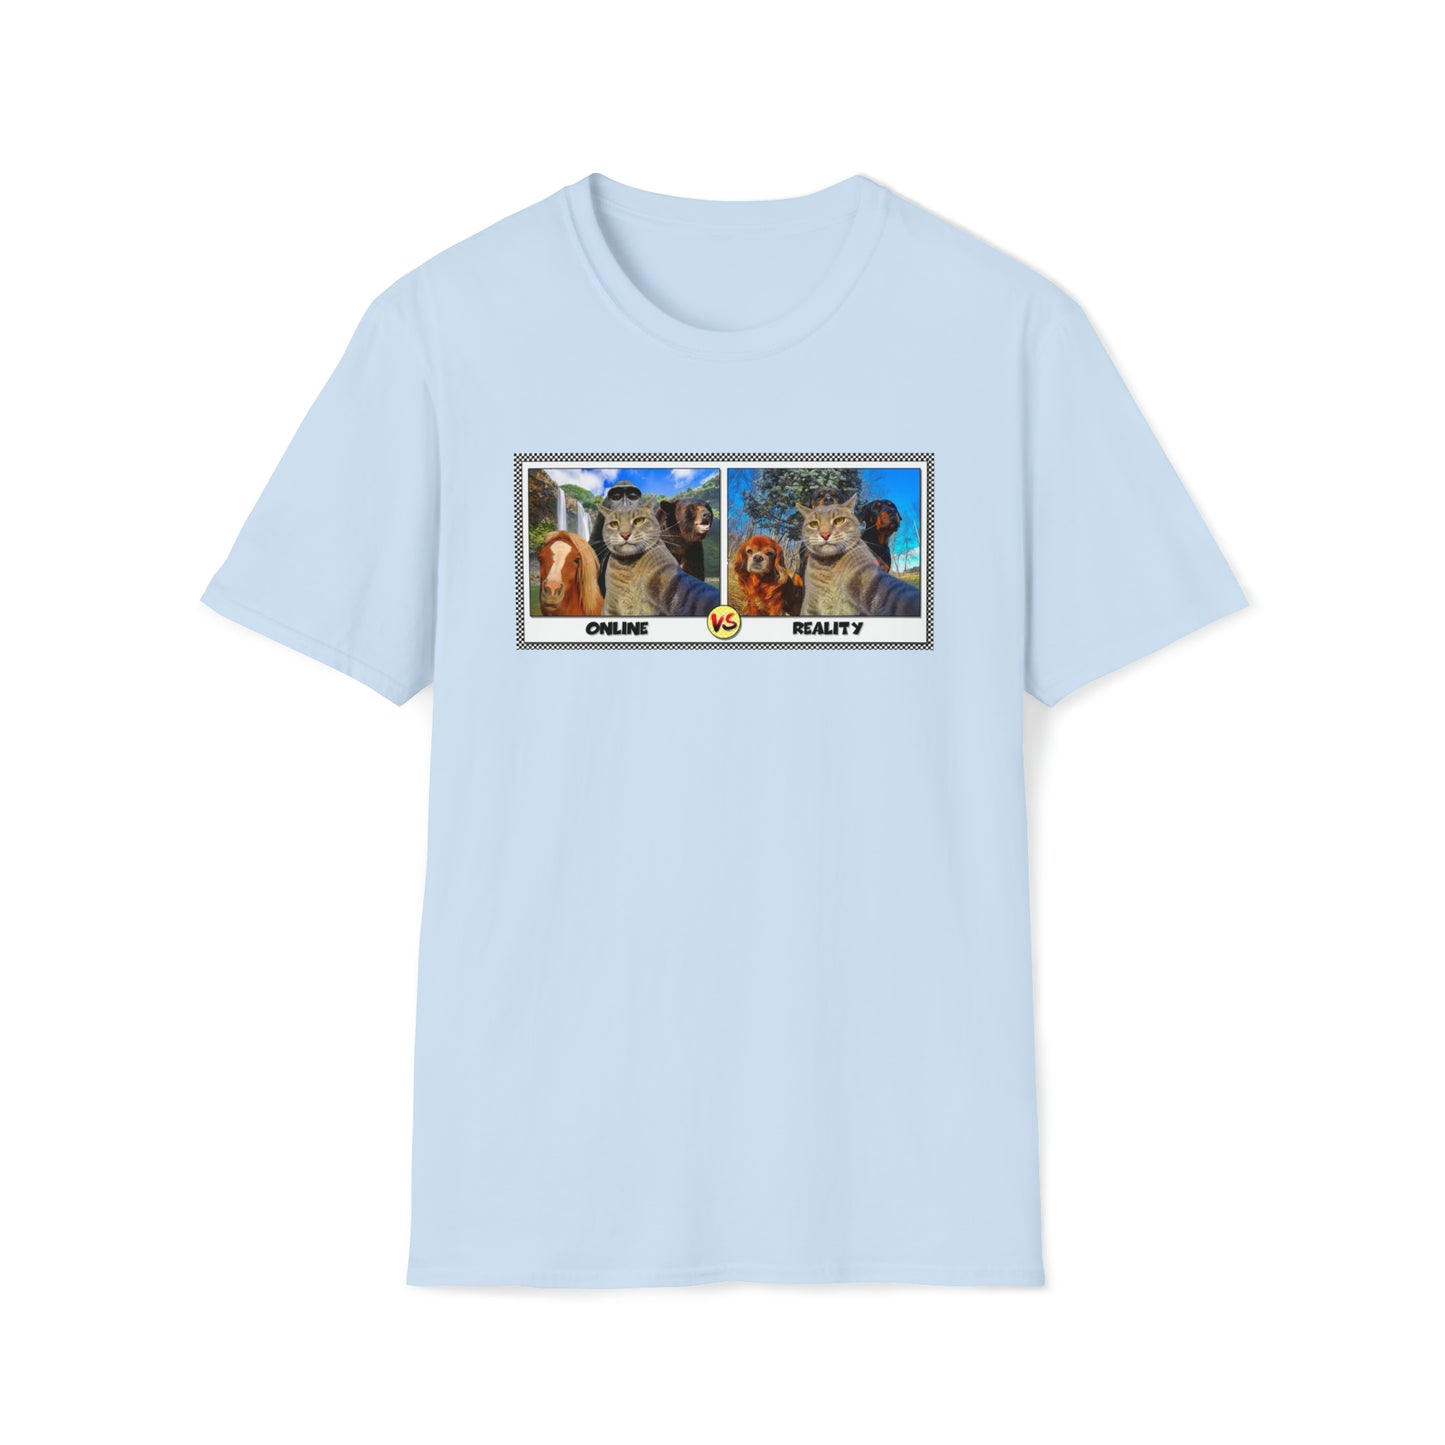 Manny The Selfie Cat Online vs Reality Tee